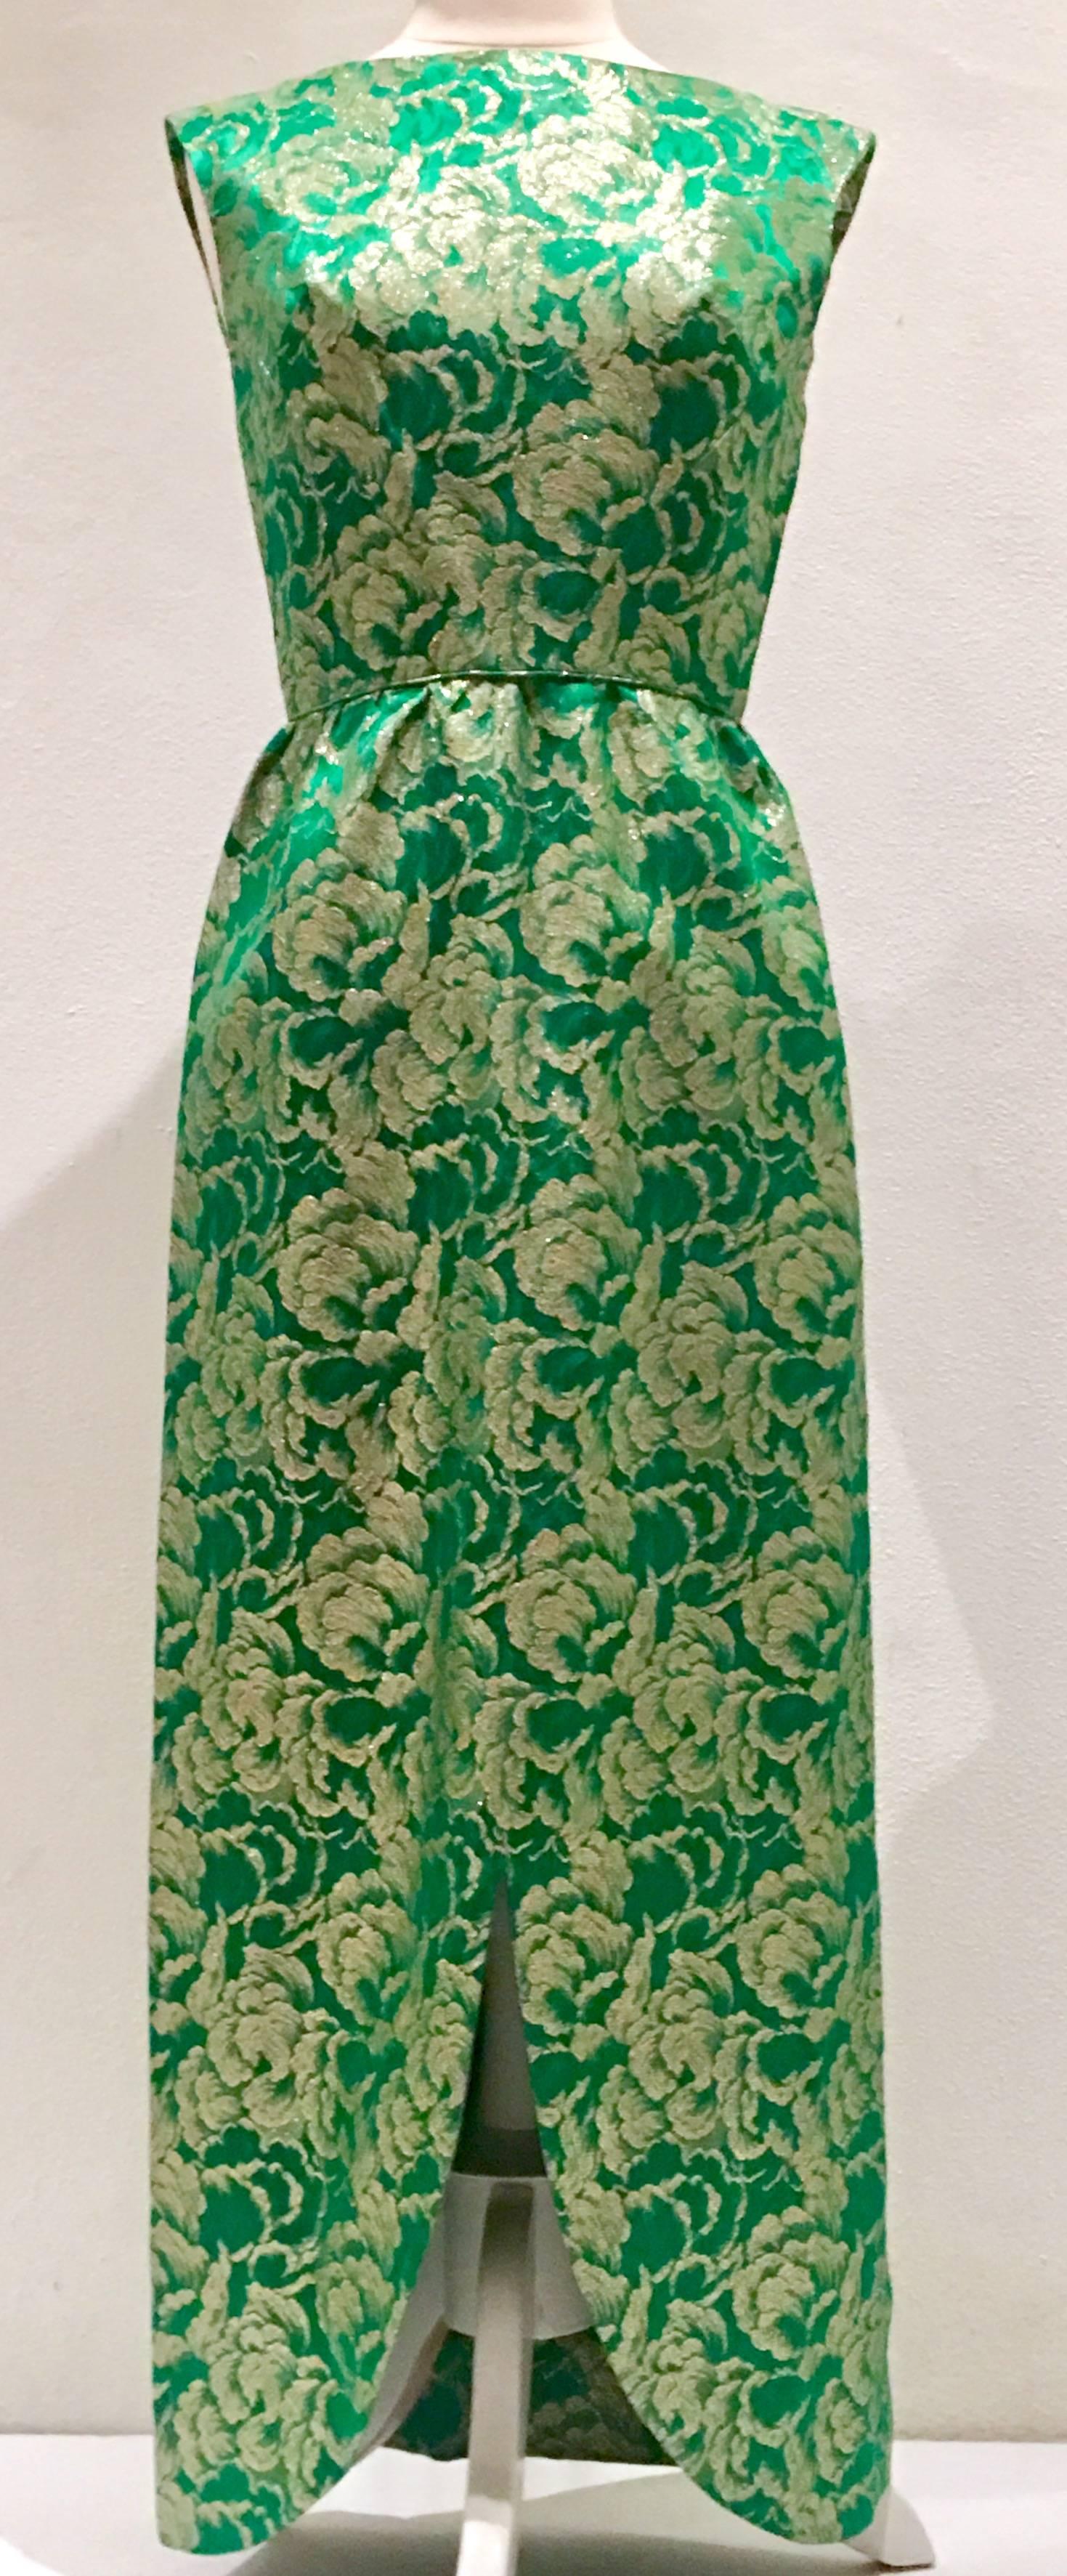 1960'S Vintage & Vibrant Emerald Green & Metallic Gold Thread Floral Brocade Full Length Cocktail Sheath Dress. Fully lined with back zipper and hook closure, interior snap shoulder straps. Fits like a US size 4 or small. pristine.
